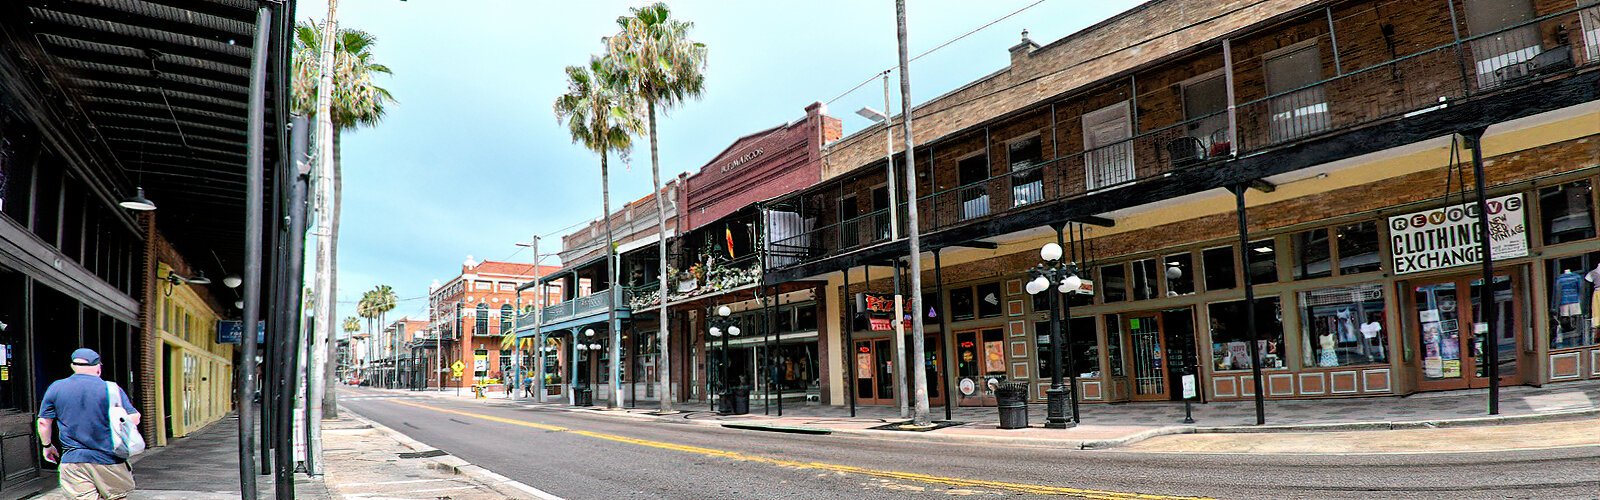 Built at the turn of the last century, the style of Ybor City structures is reminiscent of New Orleans, with wrought iron balconies.